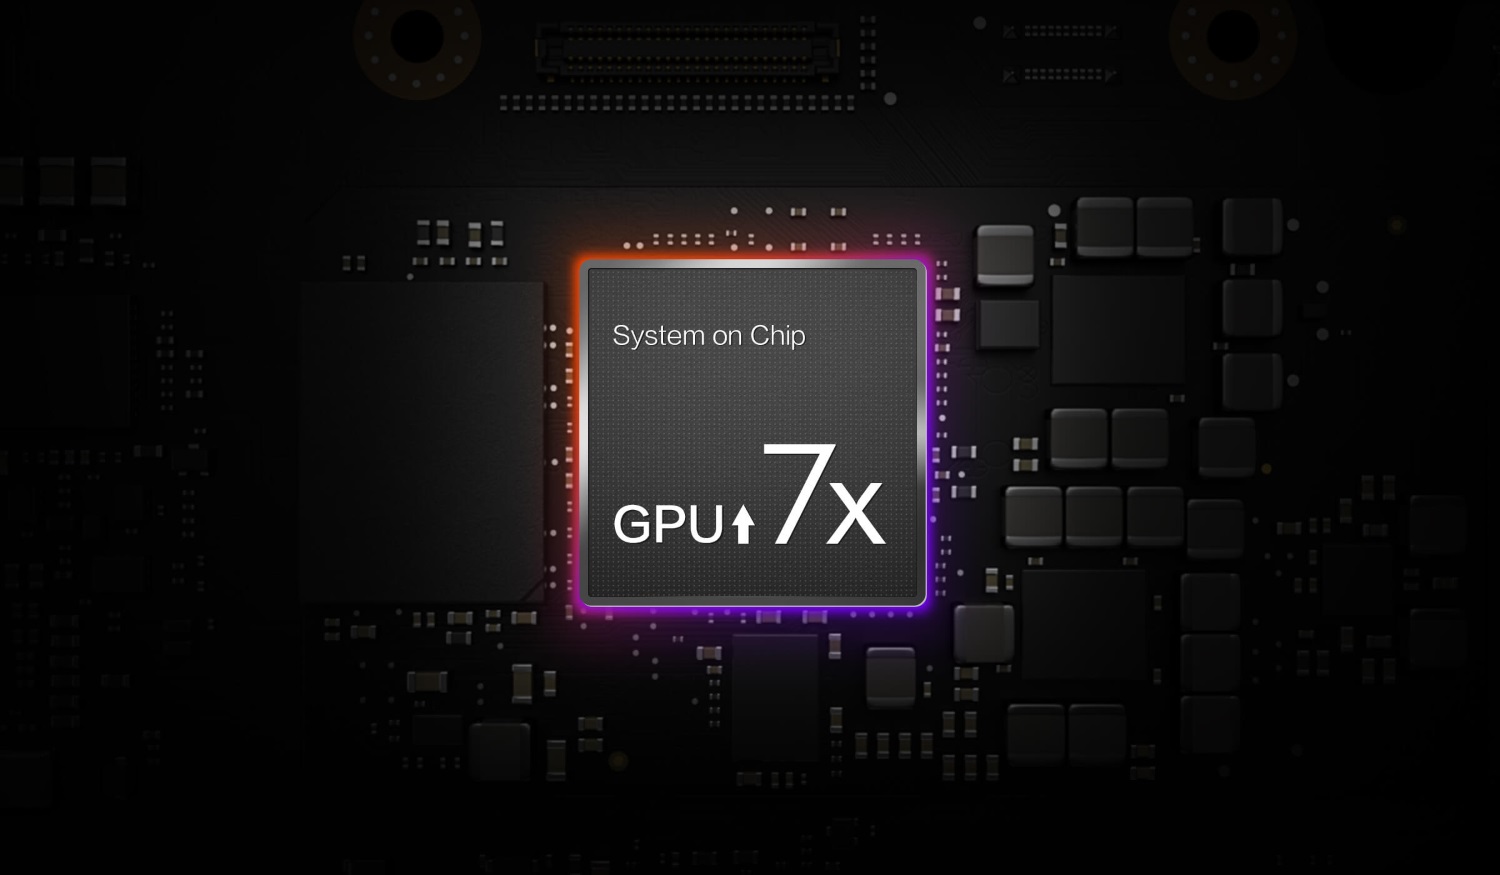 CPU chip with 7x more performance